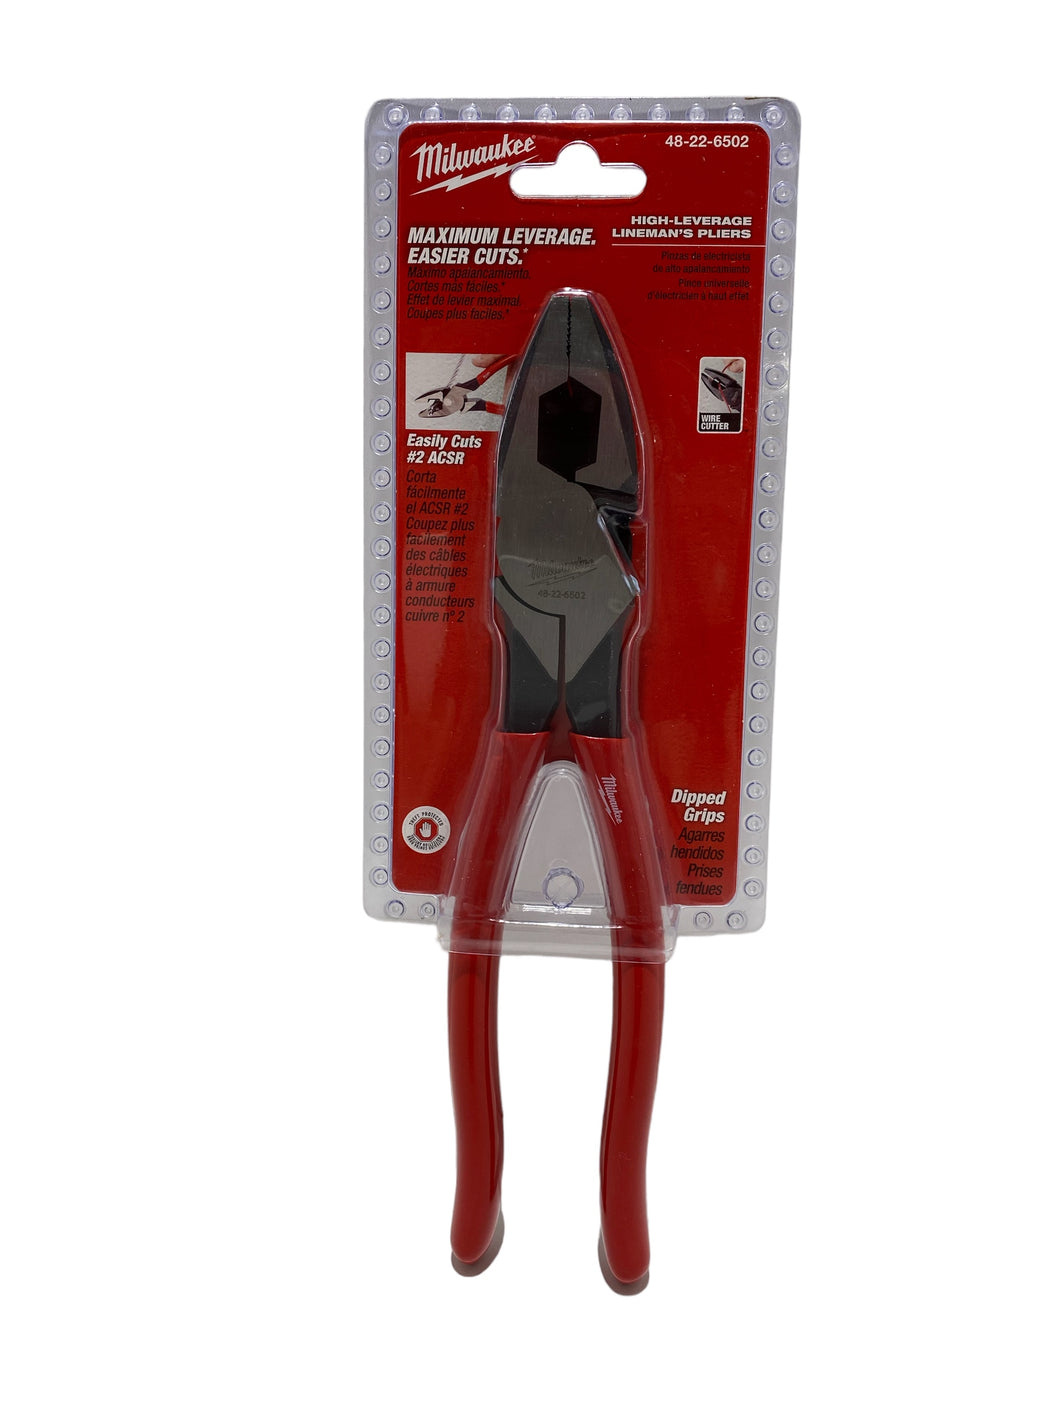 Milwaukee Maximum Leverage Easier Cuts, Dipped Grips Wire Cutter 48-22-6502 - FreemanLiquidators - [product_description]